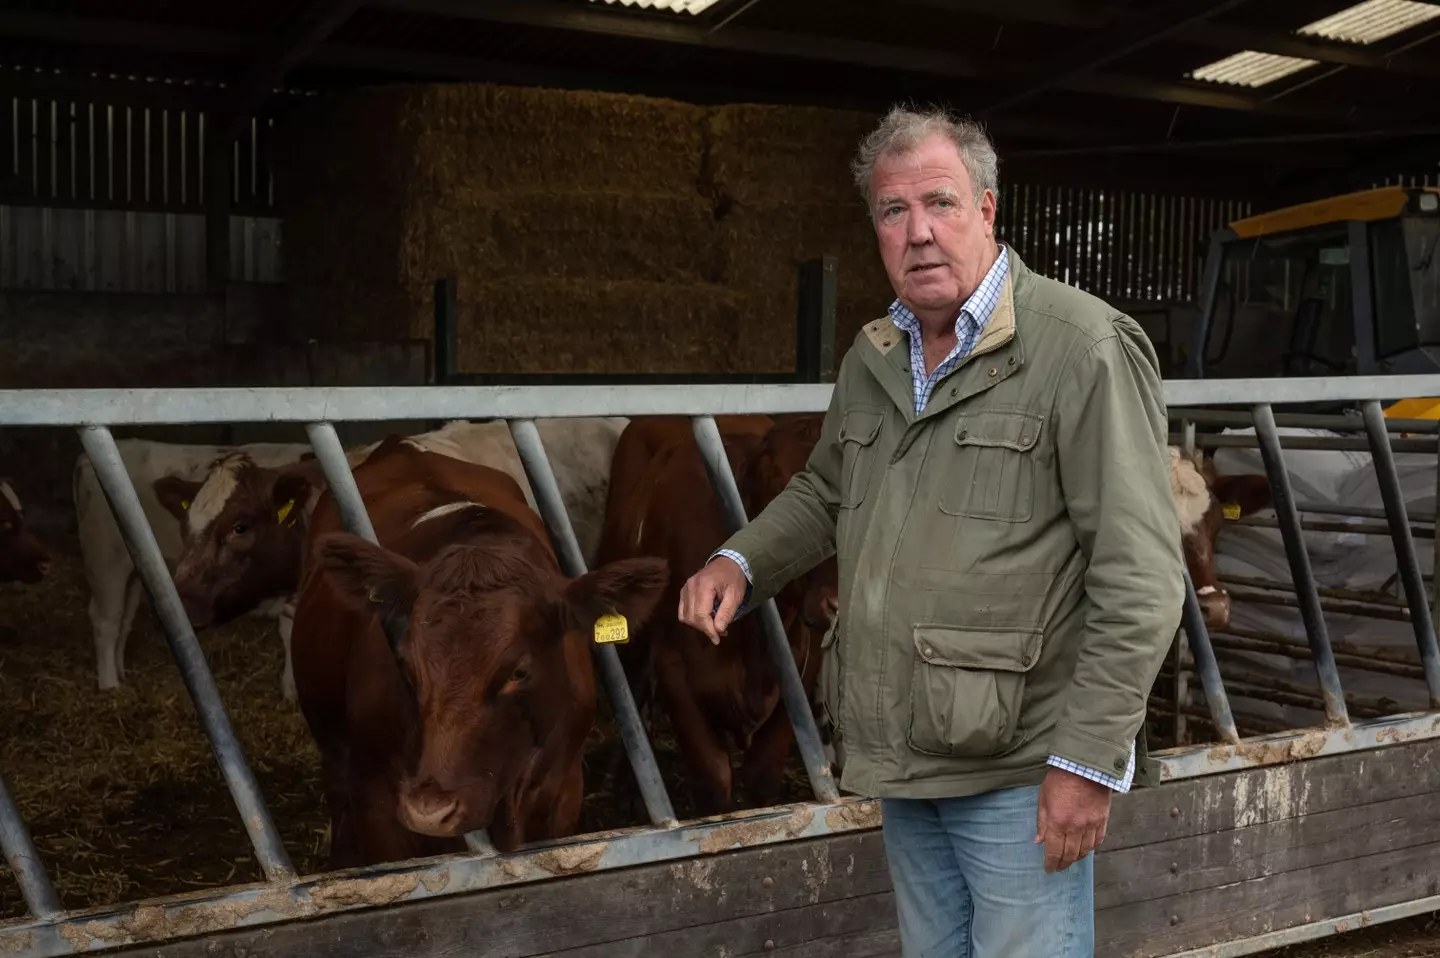 Clarkson said badgers are causing farmers to take their own lives.